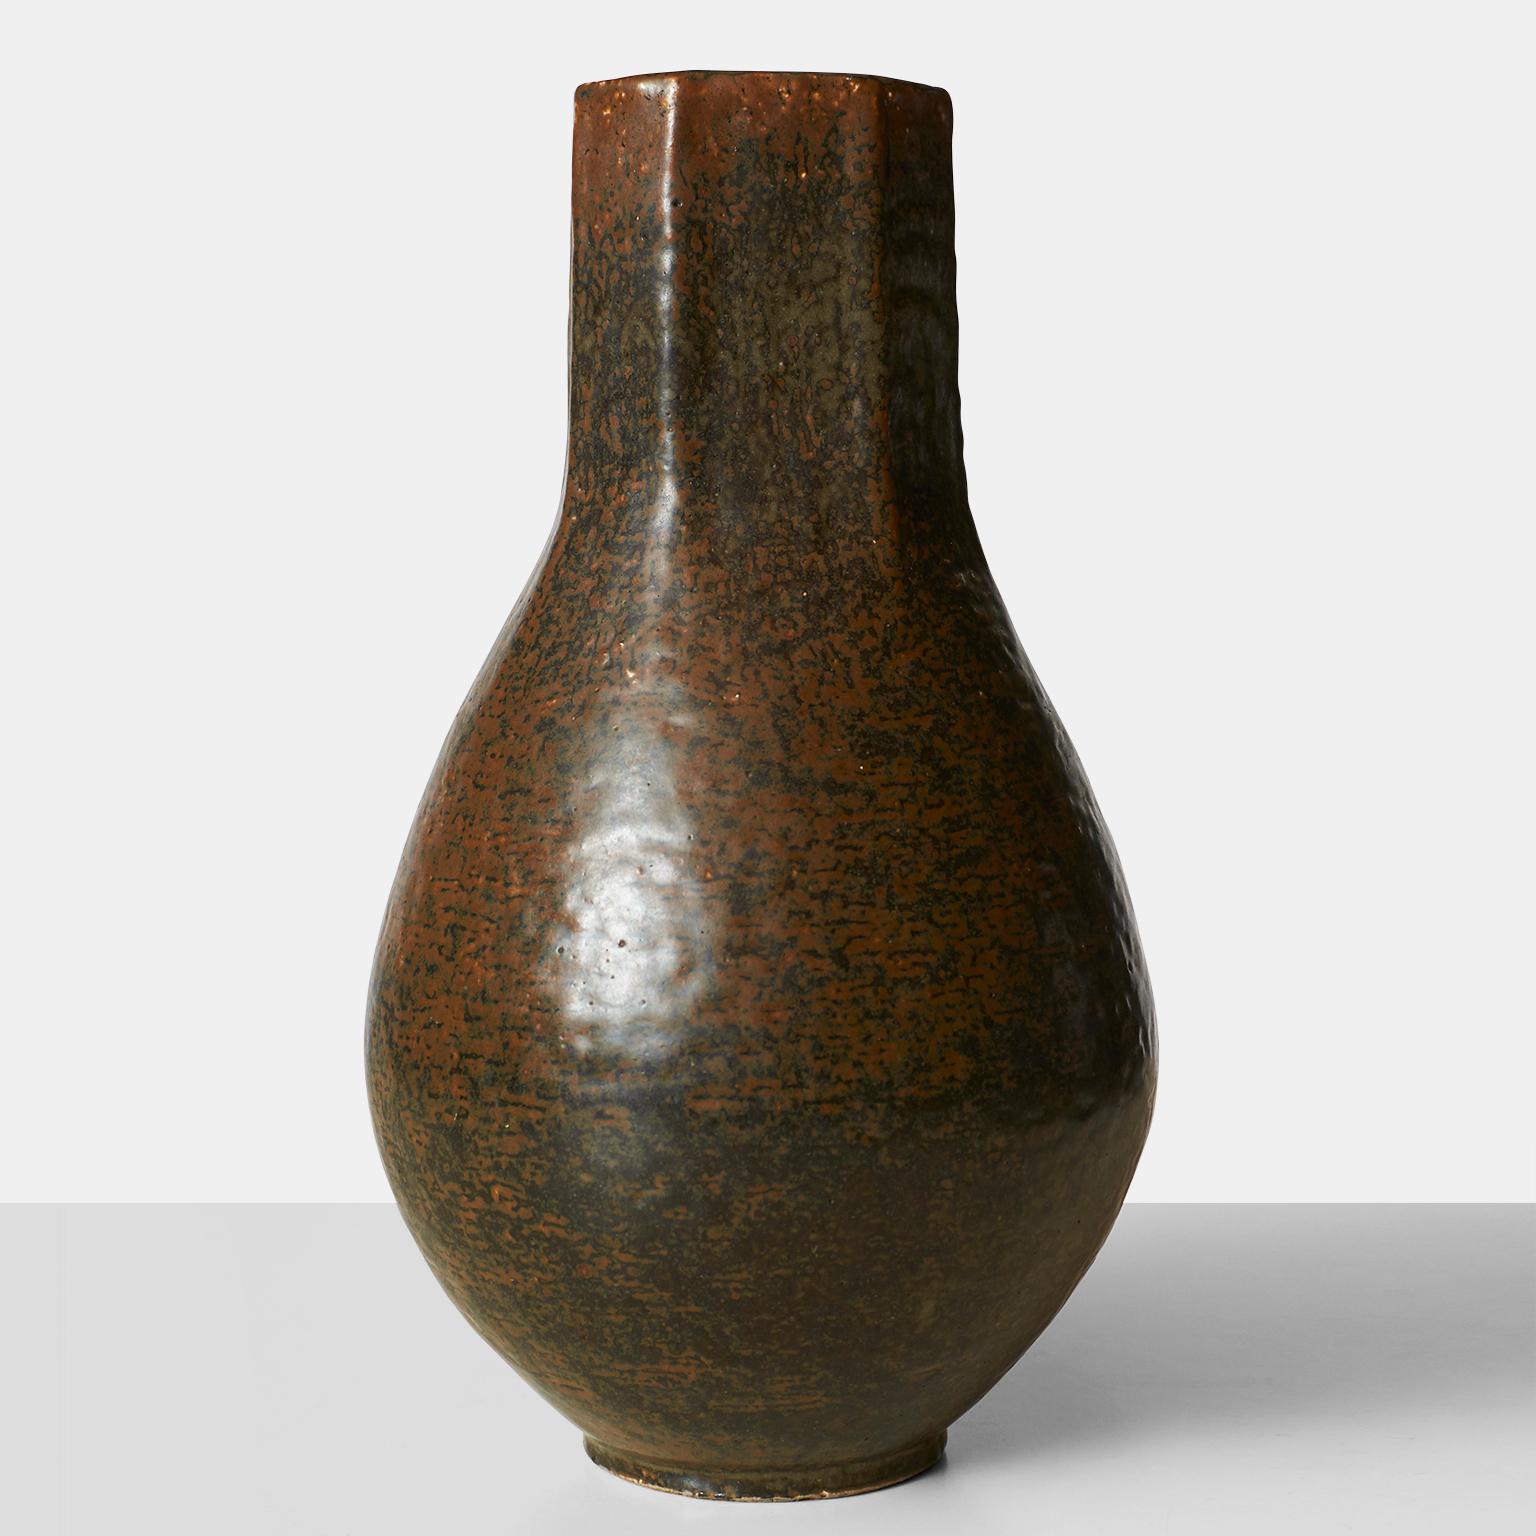 A stoneware vase by Eva Staehr-Nielsen, with octagonal mouth decorated with brownish glaze. Signed E.St.N. Manufactured and marked by Saxbo, Denmark.